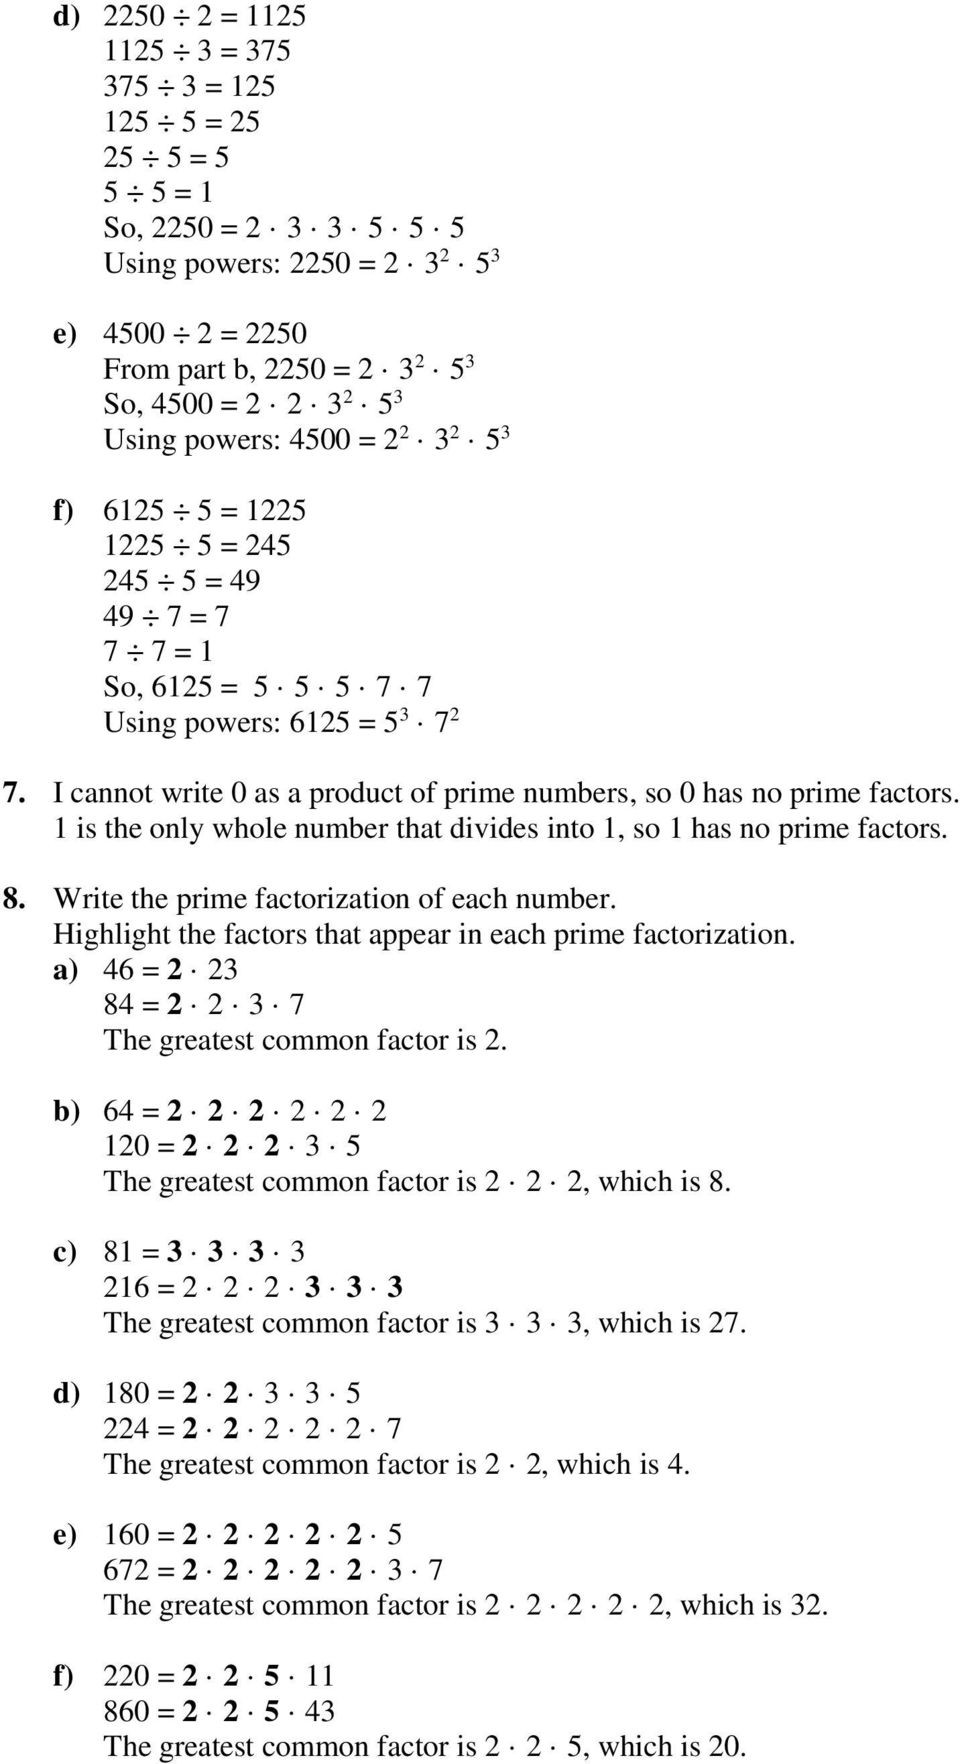 Prime Factorization Worksheet Pdf Lesson 3 1 Factors and Multiples Of whole Numbers Exercises